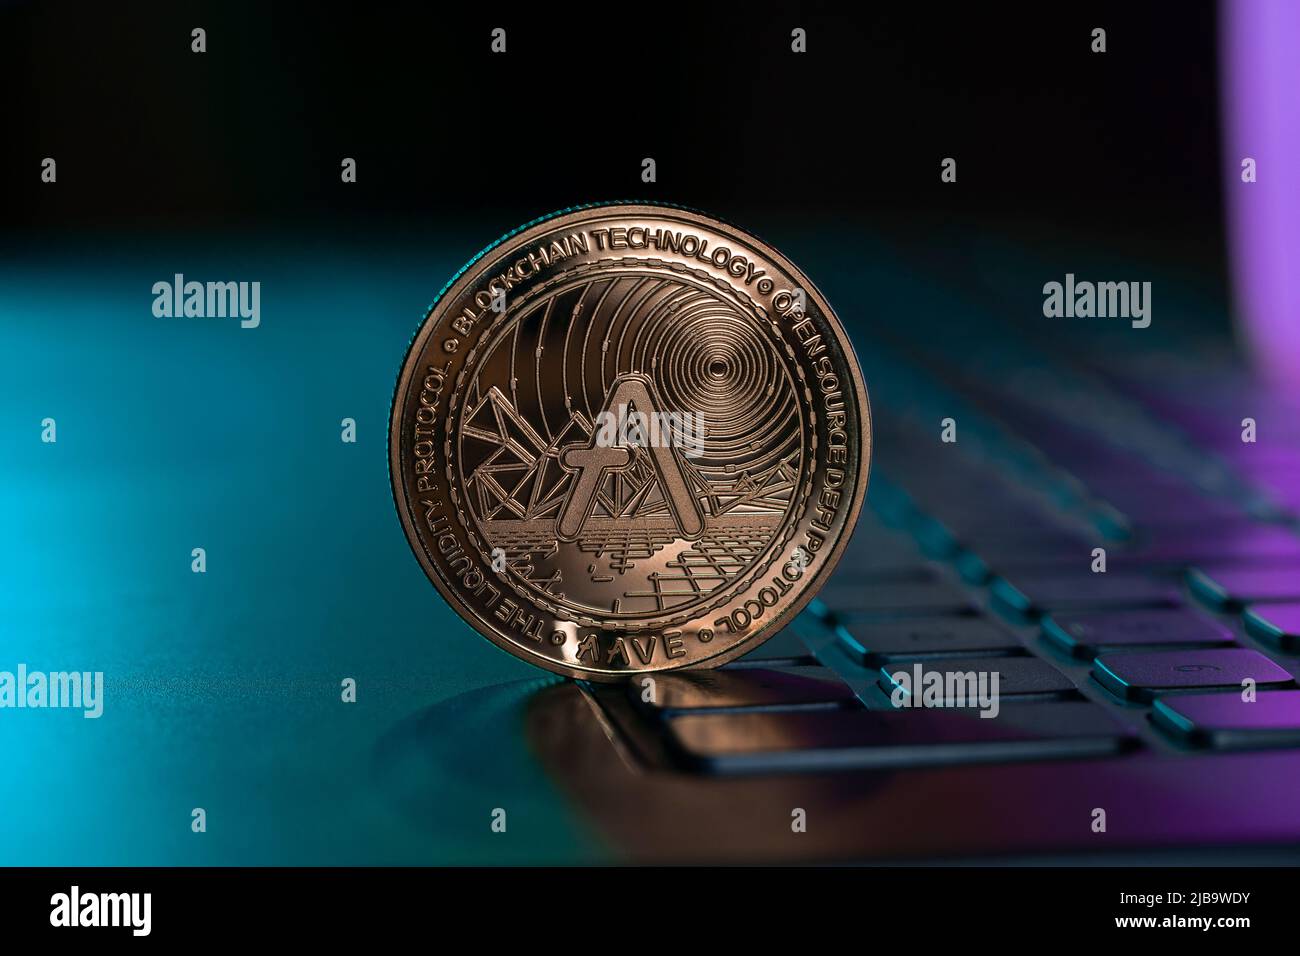 Aave Cryptocurrency Physical Coin Placed Laptop Keyboard and lit with  purple and blue lights Stock Photo - Alamy